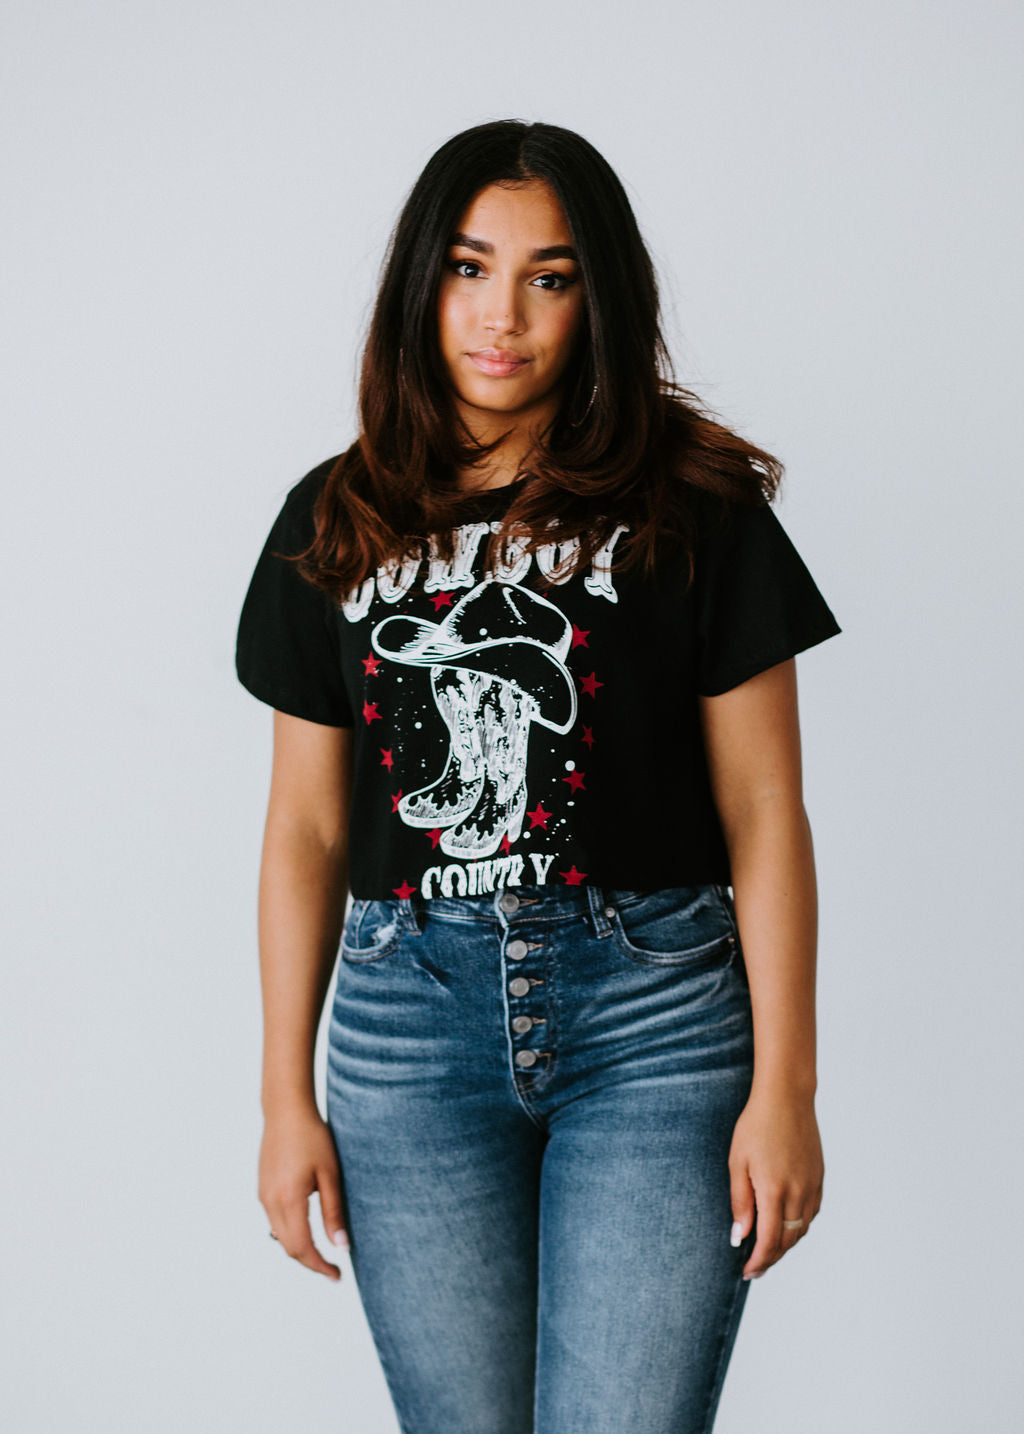 Cowboy Country Graphic Crop Tee